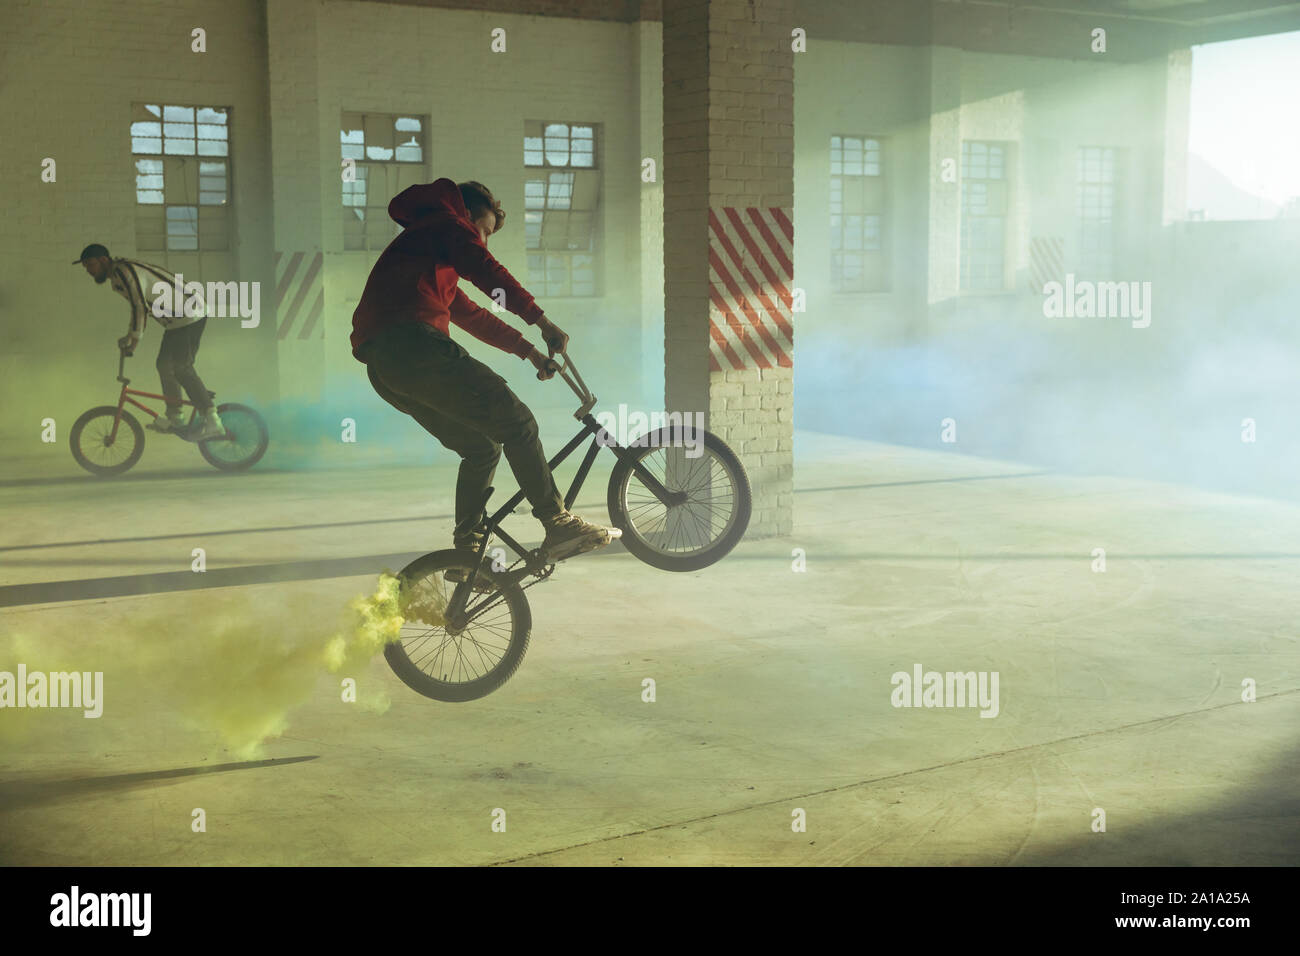 BMX riders in an empty warehouse using smoke grenades Stock Photo